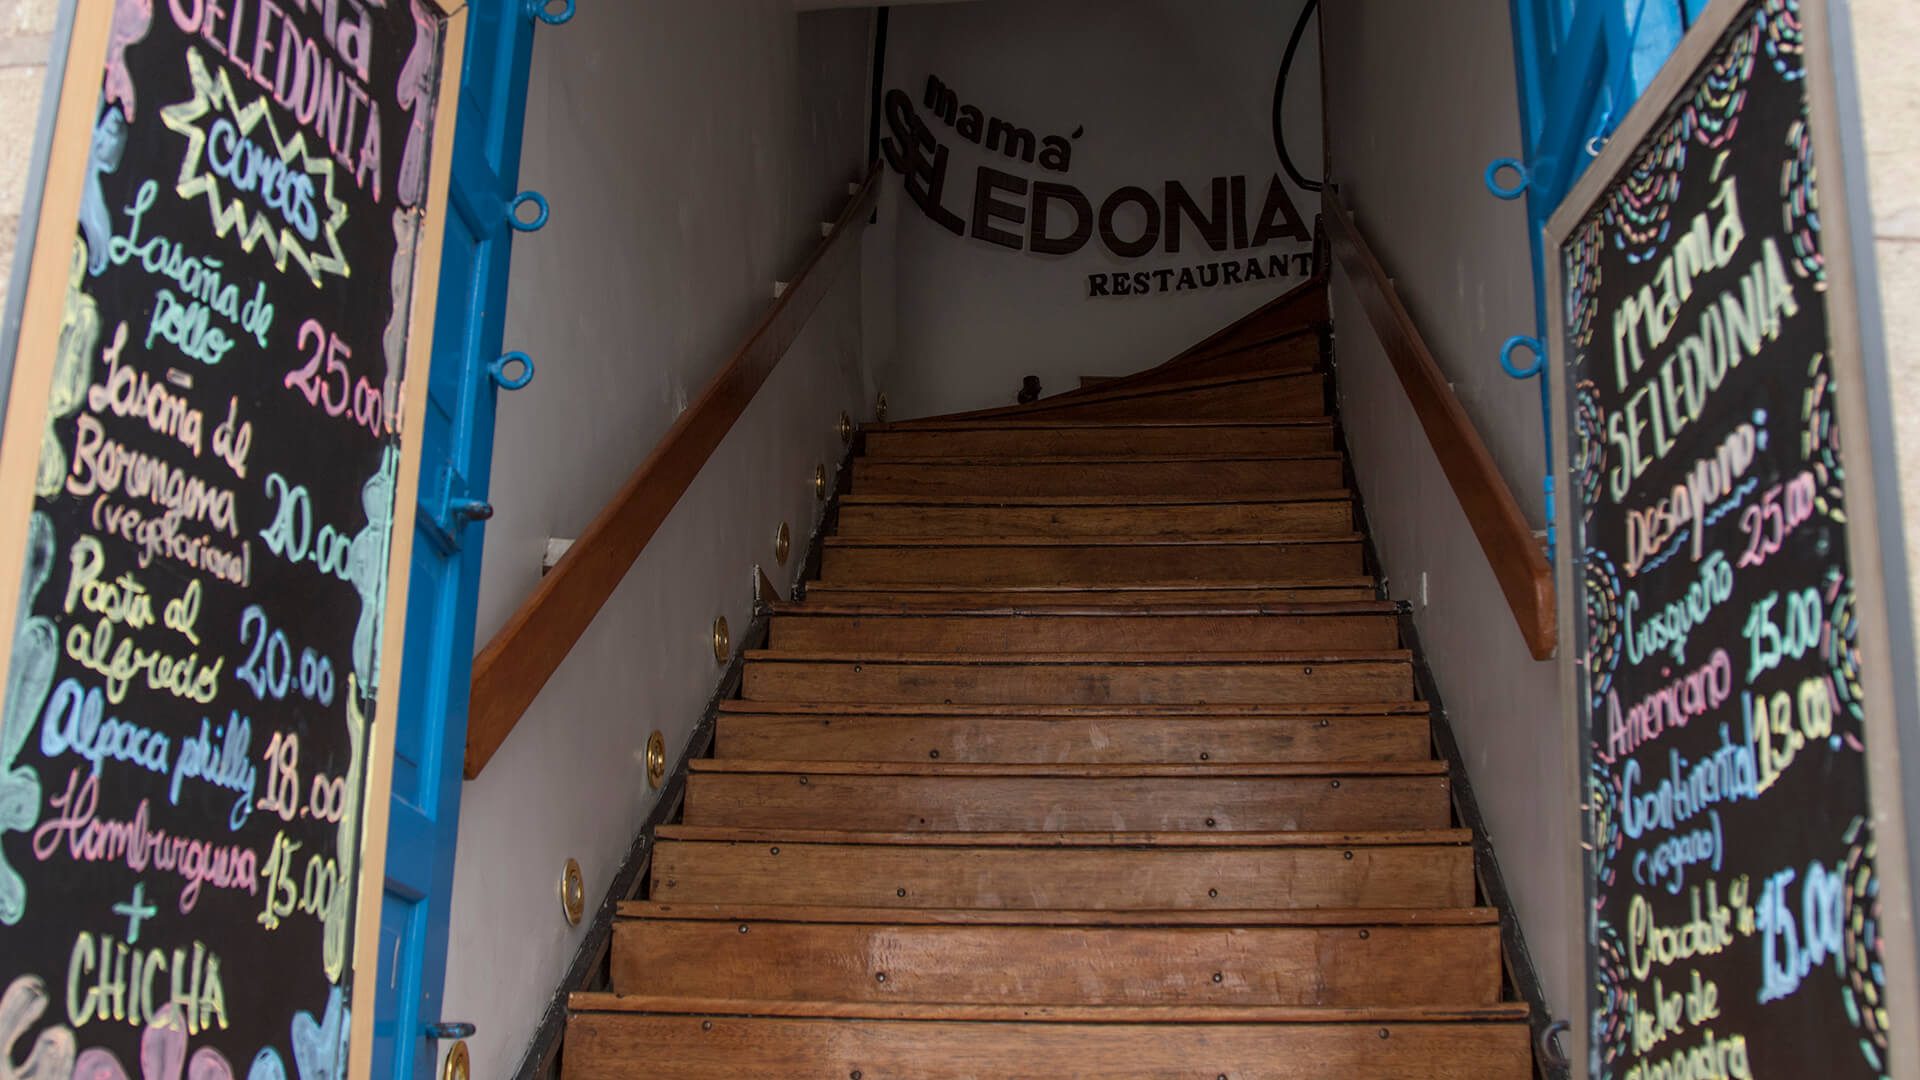 Staircase towards Mamá Seledonia restaurant located on a second floor | RESPONSible Travel Peru